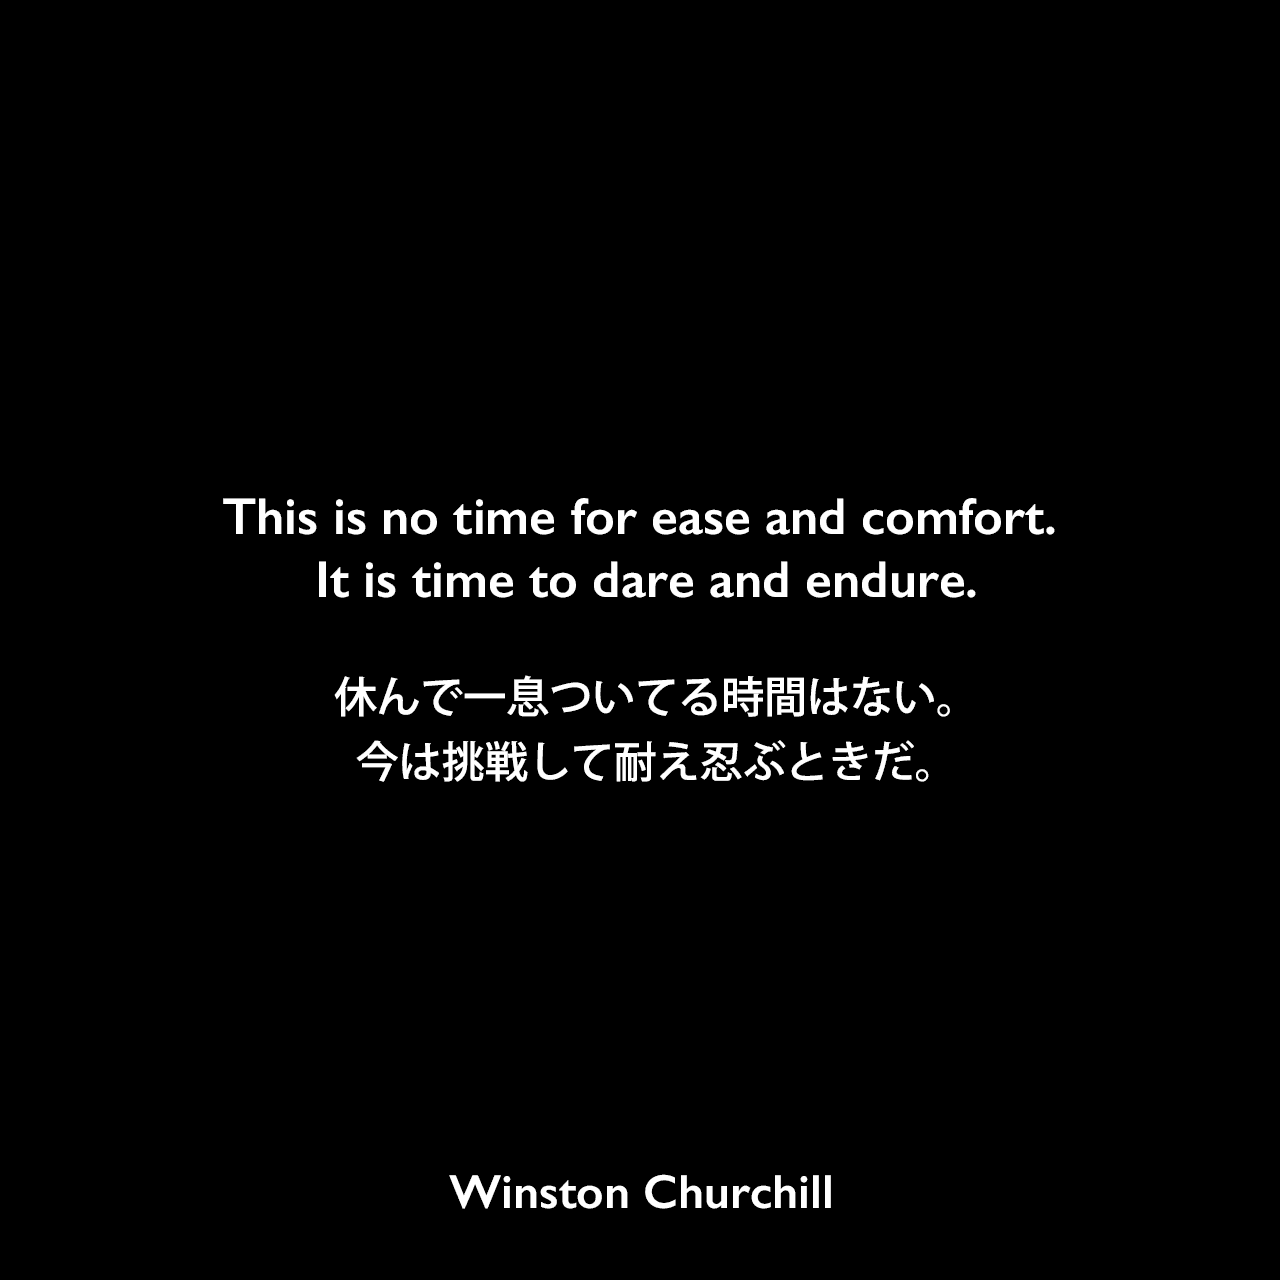 This is no time for ease and comfort. It is time to dare and endure.休んで一息ついてる時間はない。今は挑戦して耐え忍ぶときだ。Winston Churchill